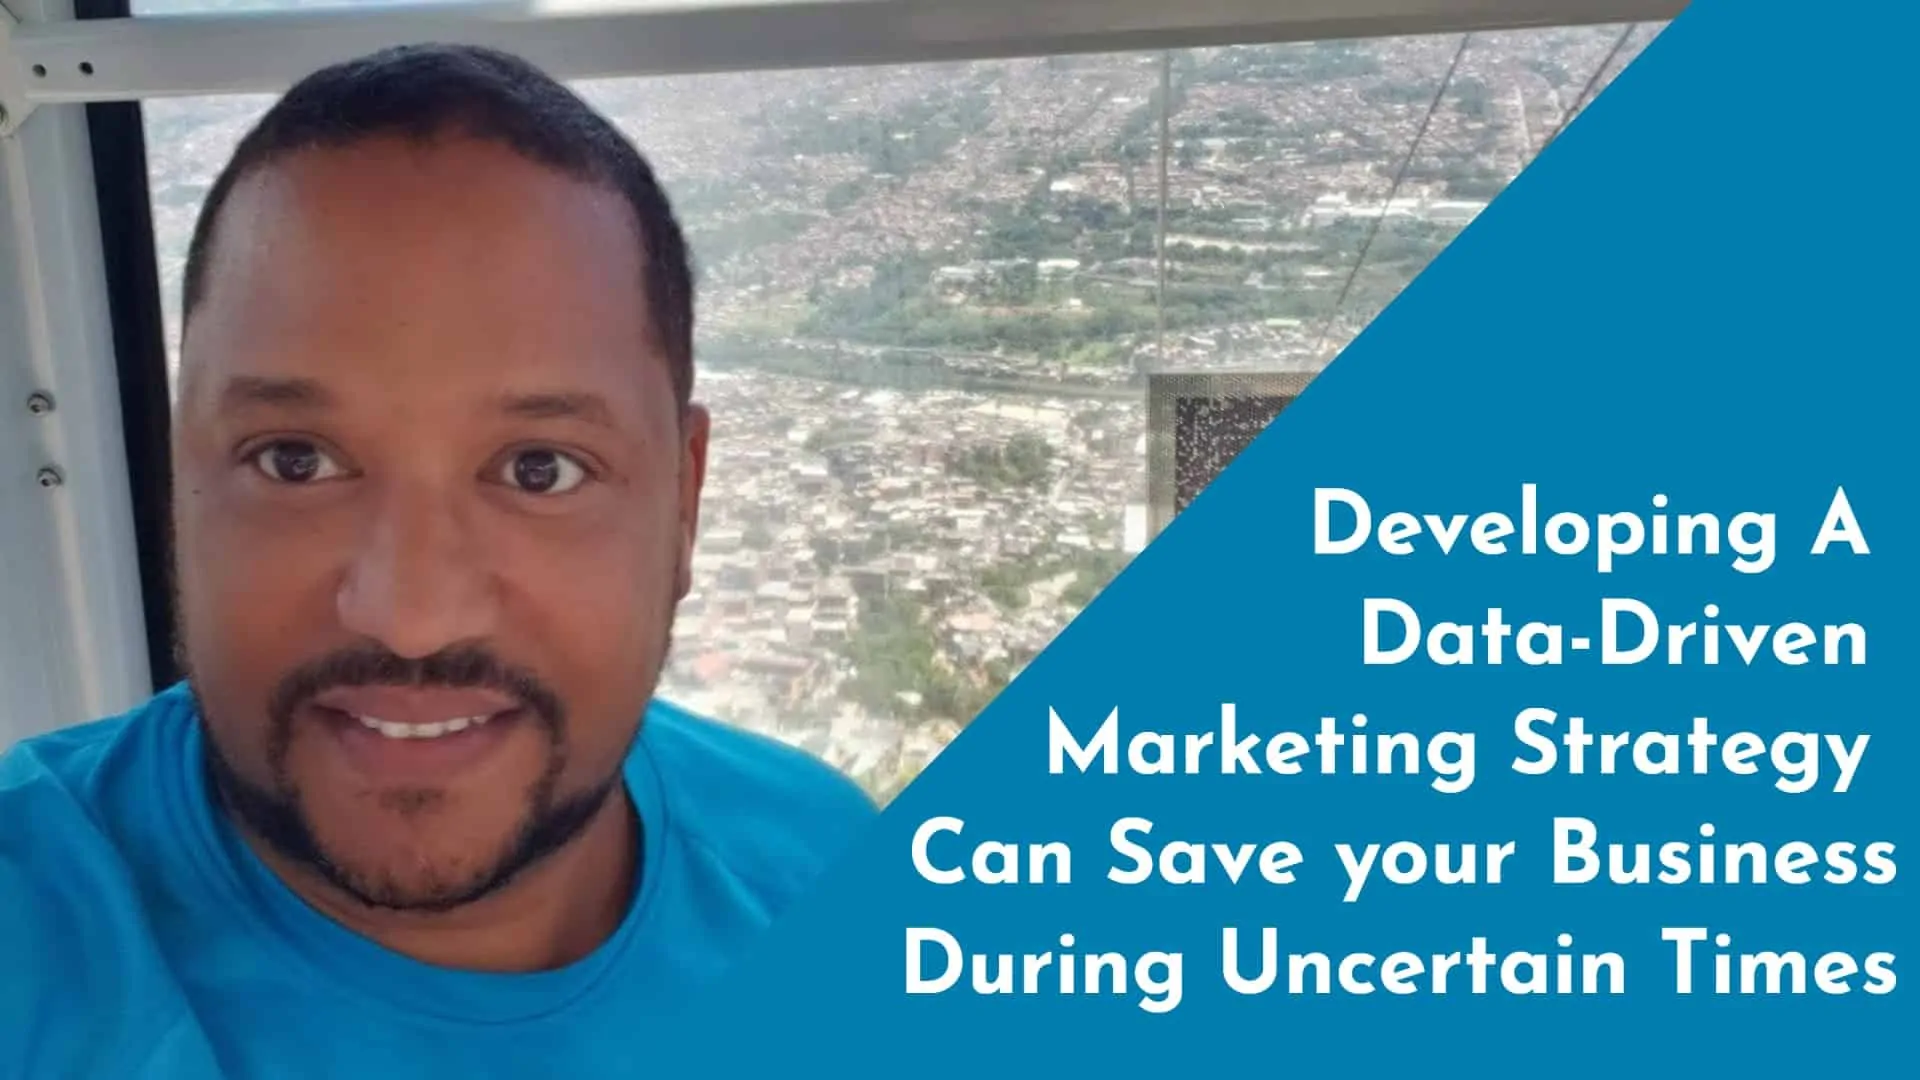 Developing A Data-Driven Marketing Strategy Can Save your Business During Uncertain Times